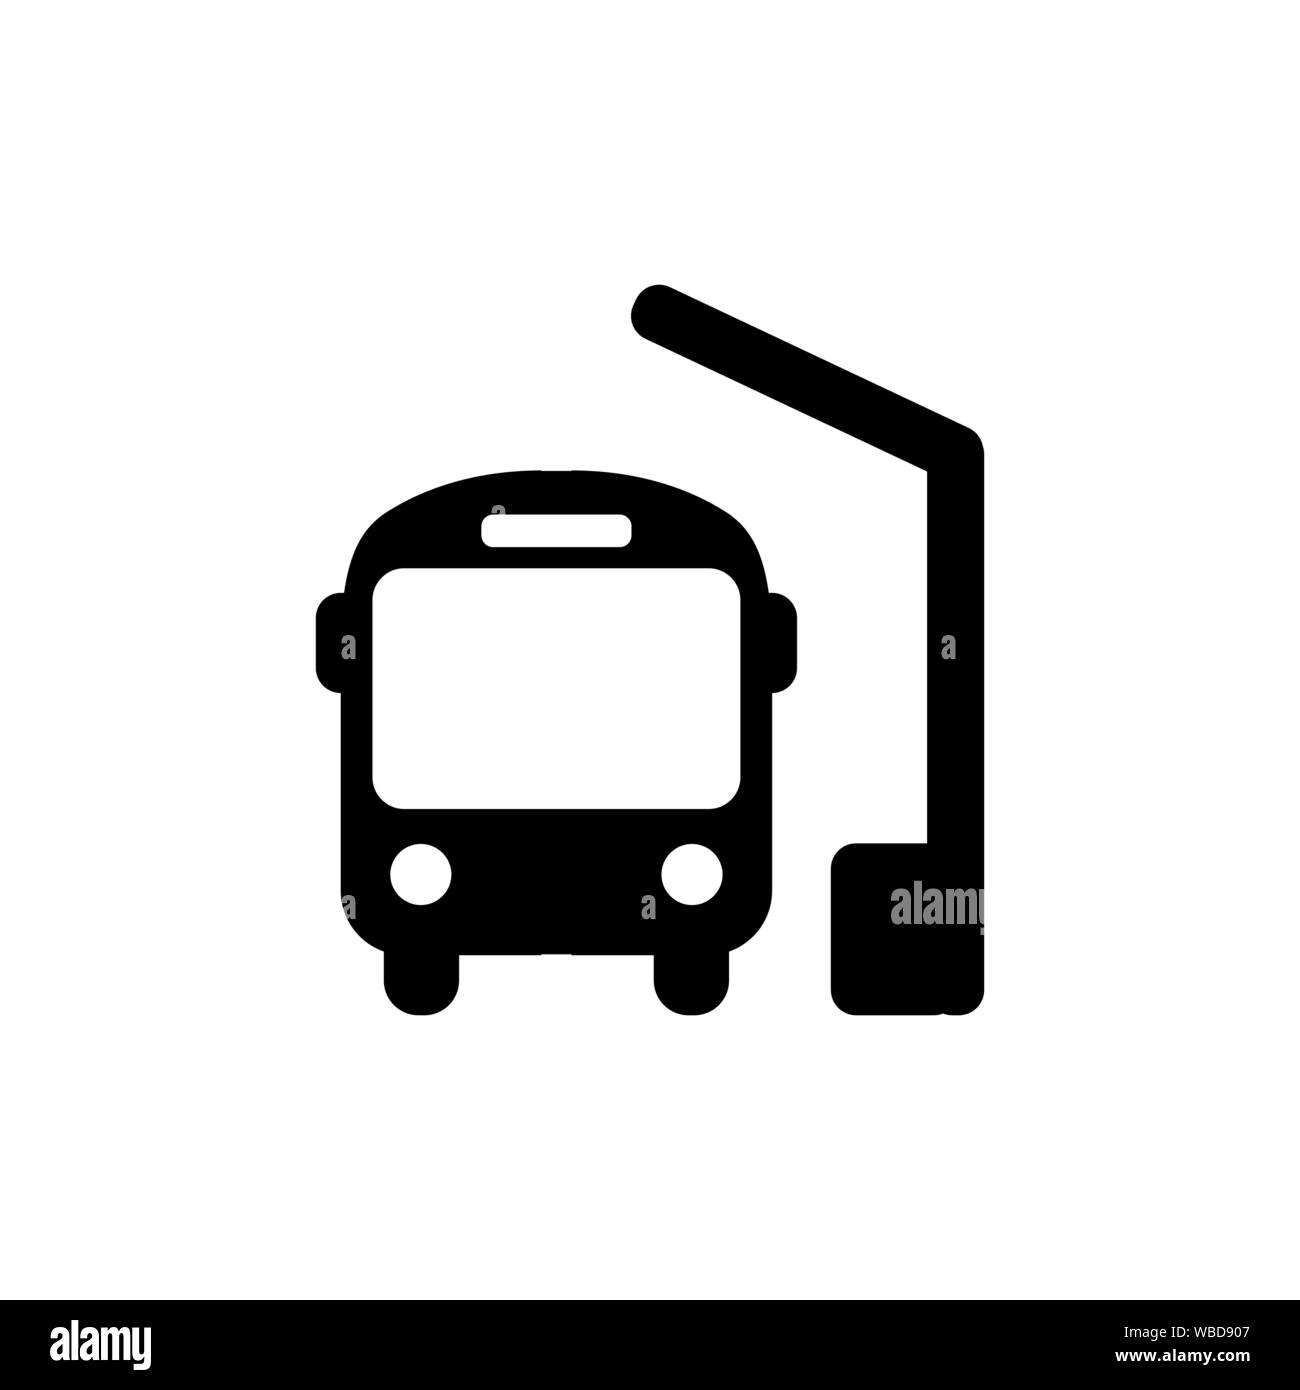 Bus station icon in black. Public bus symbol in flat style isolated on white background. Simple bus abstract icon for web site design or button to mob Stock Vector